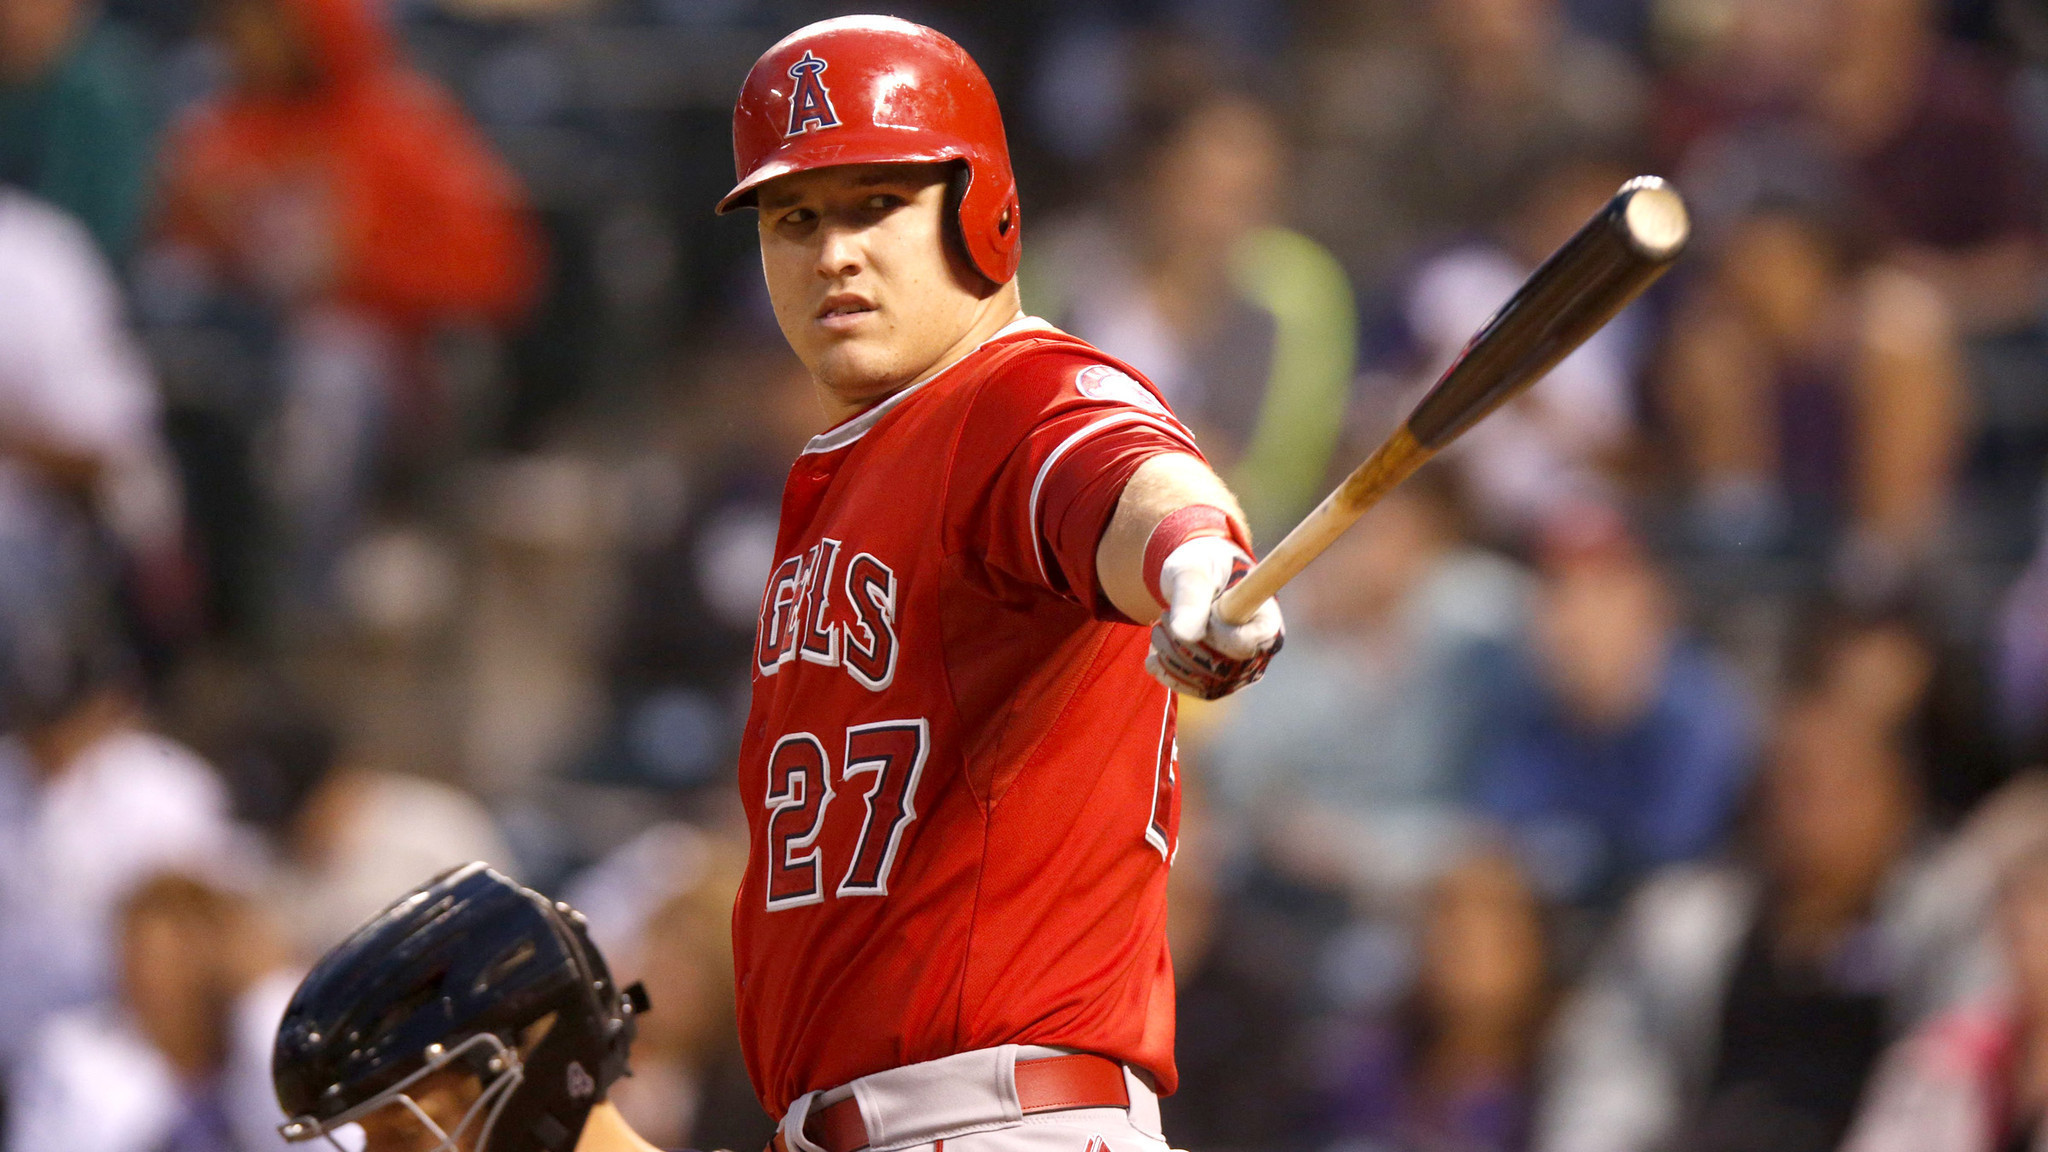 la-sp-sn-angels-mike-trout-home-run-derby-20150708